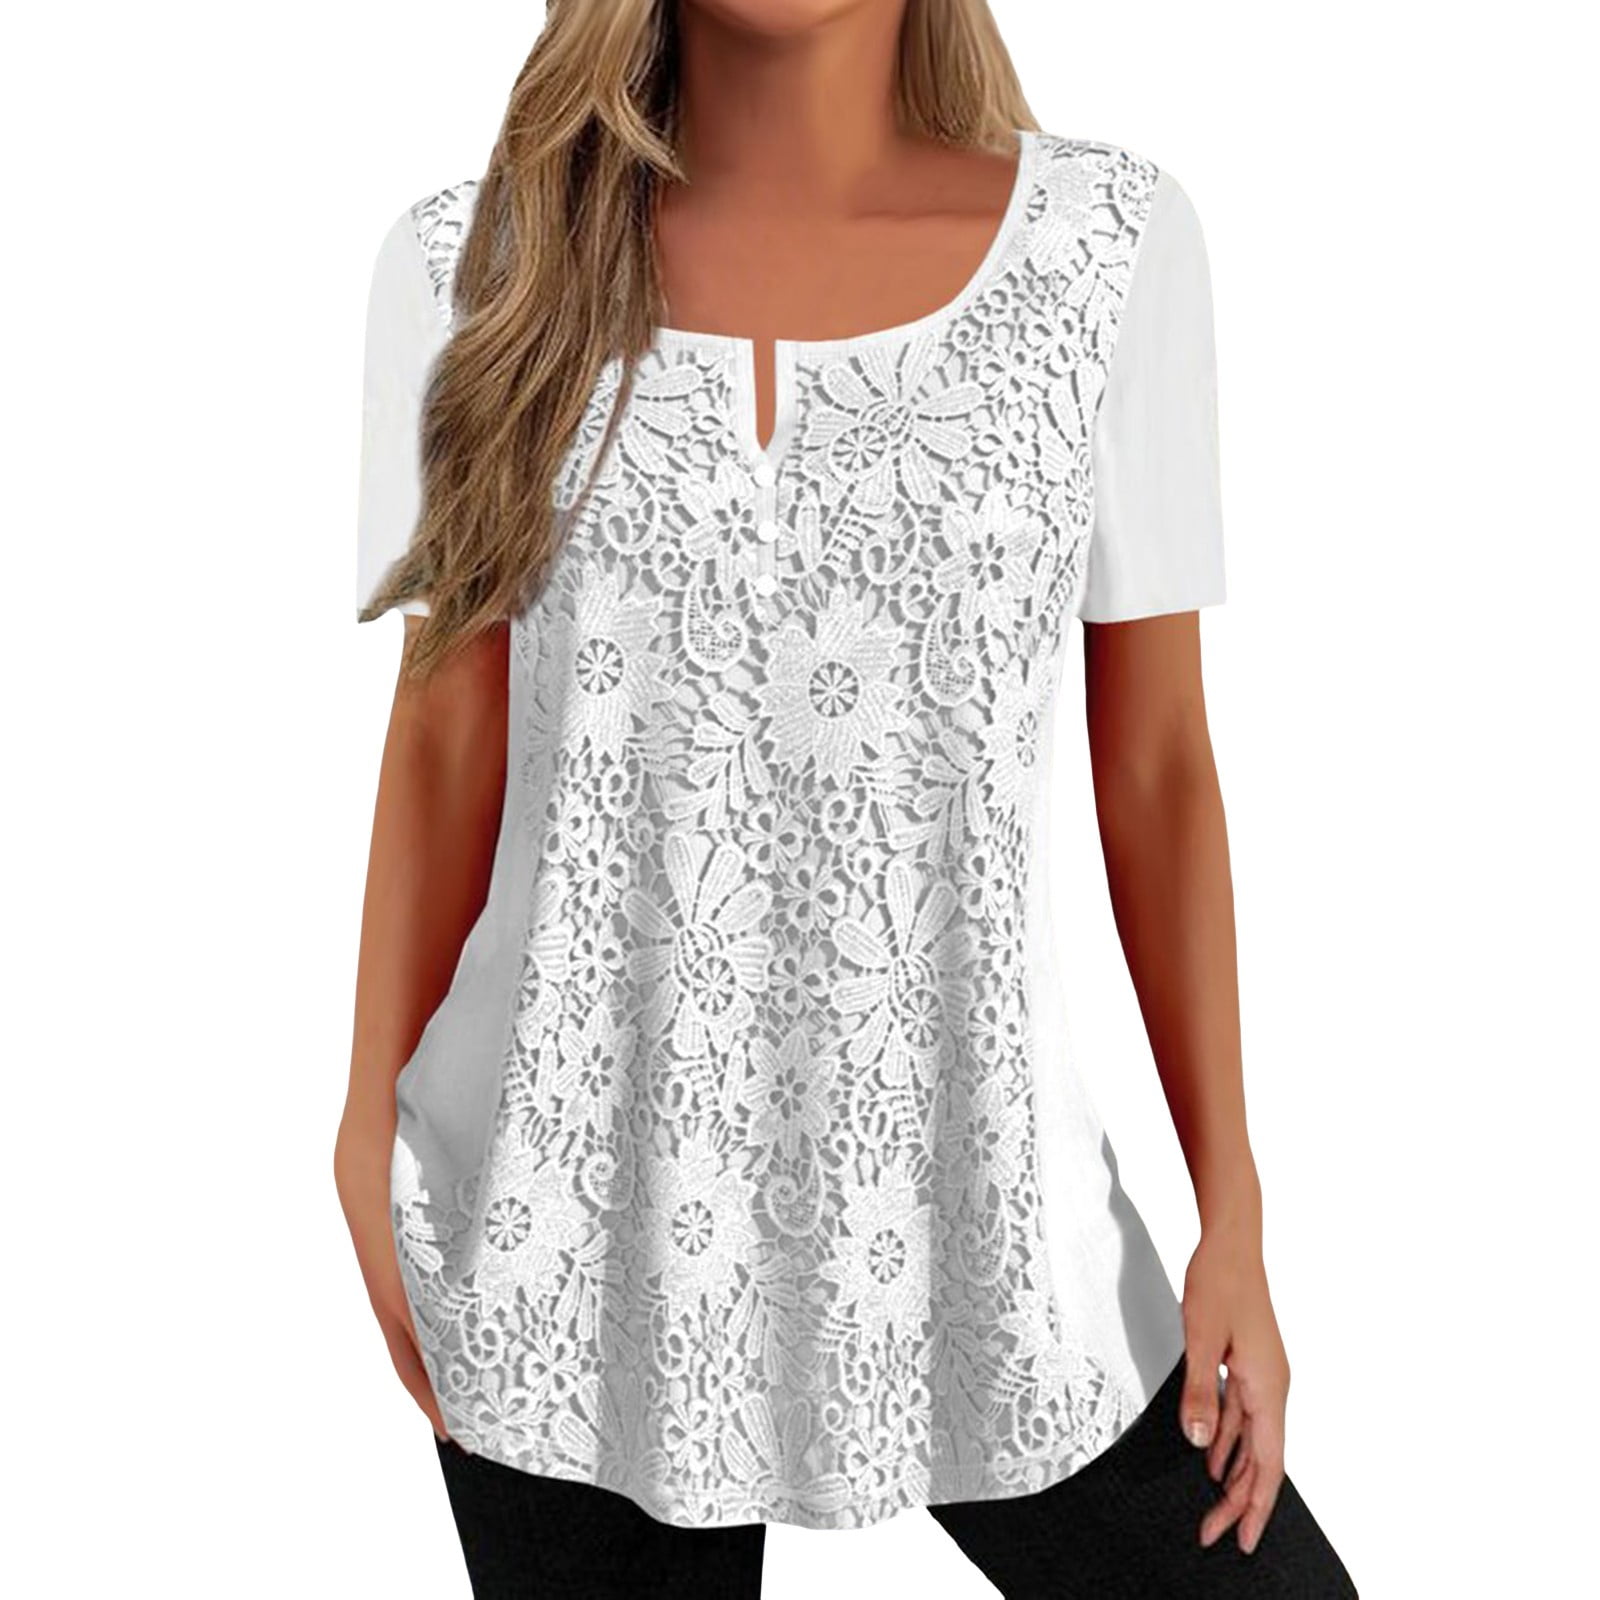 Youmylove Women Shirt Blouse Solid Color Lace Short Sleeve Casual Basic ...